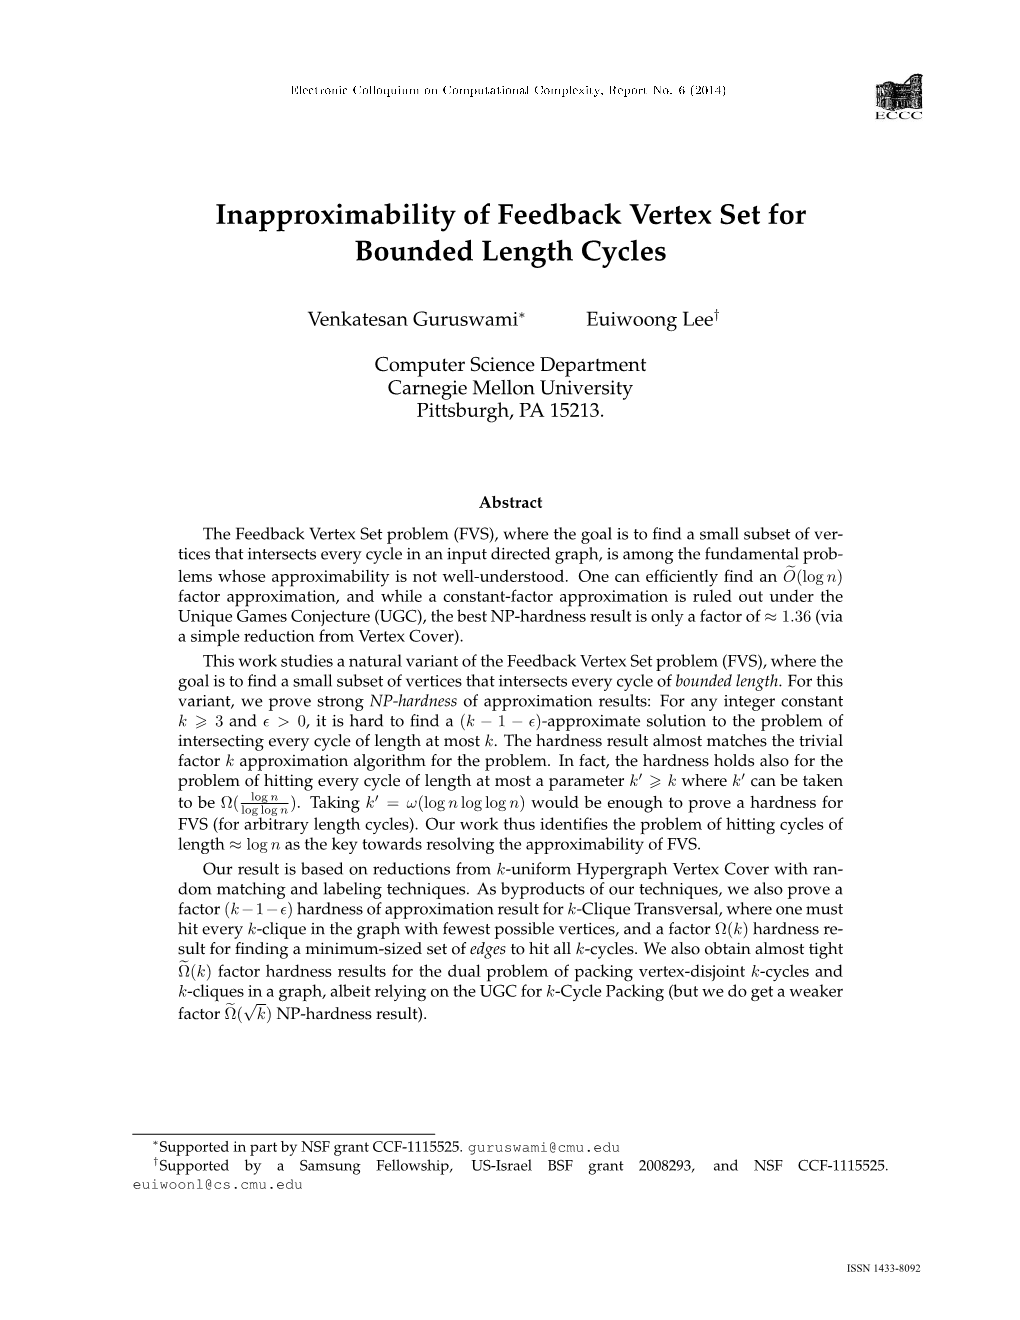 Inapproximability of Feedback Vertex Set for Bounded Length Cycles